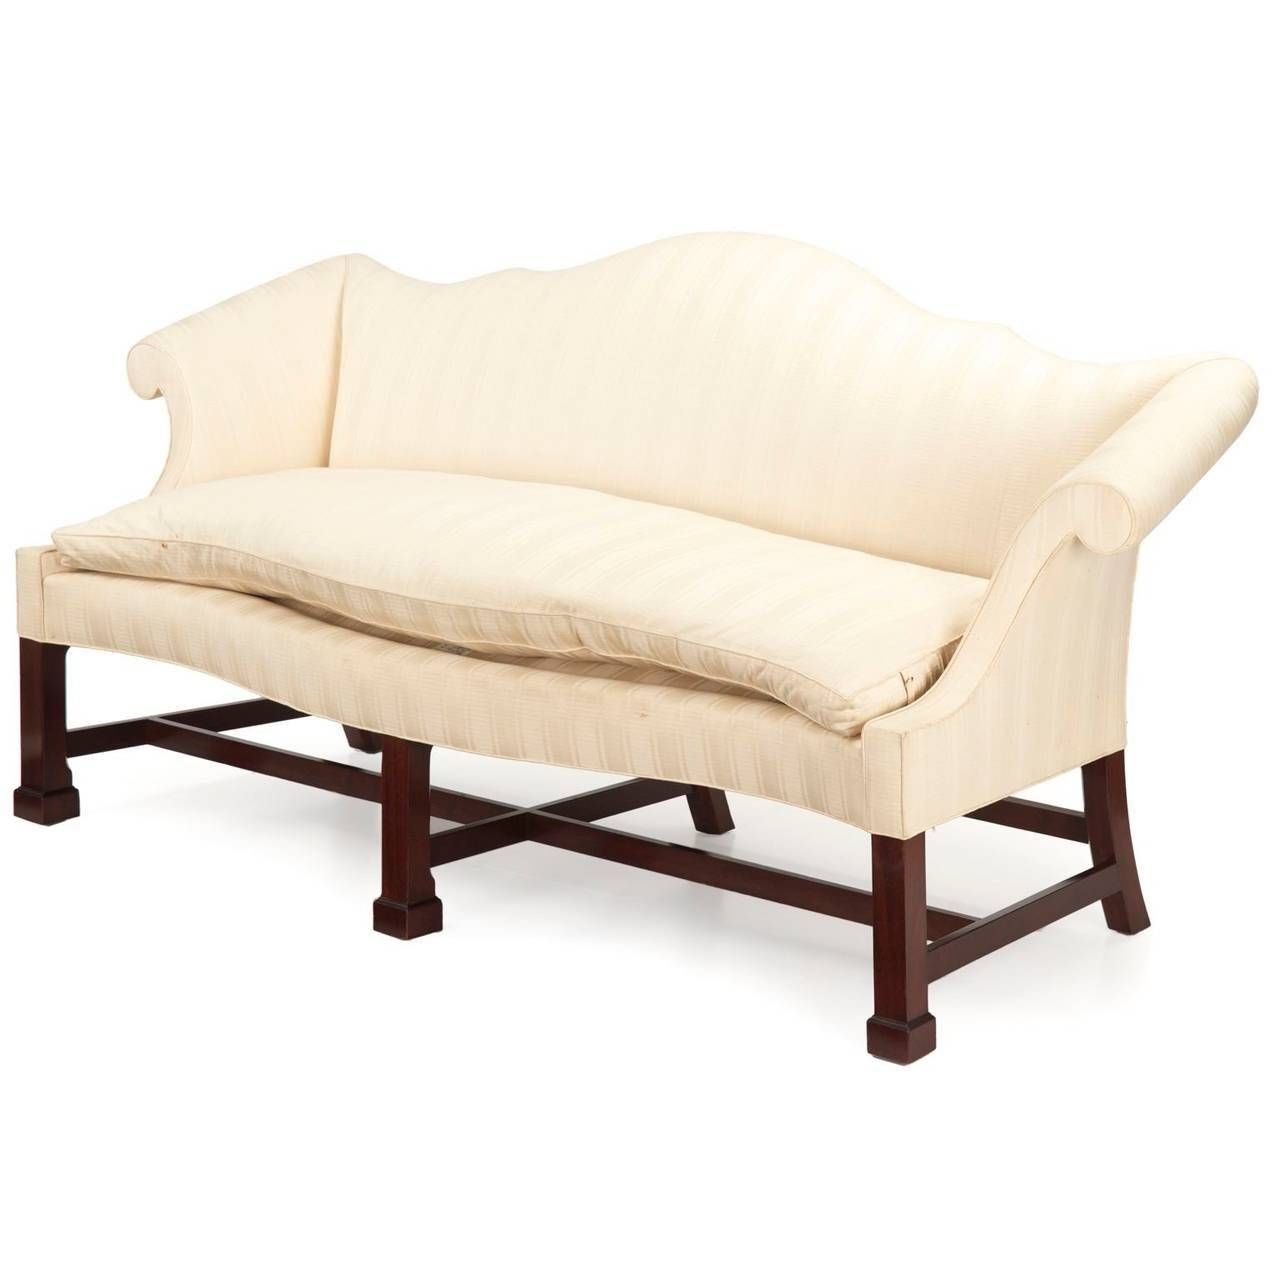 American Chippendale Style Mahogany Camel Back Sofa At 1stdibs Inside Chippendale Camelback Sofas (Photo 12 of 15)